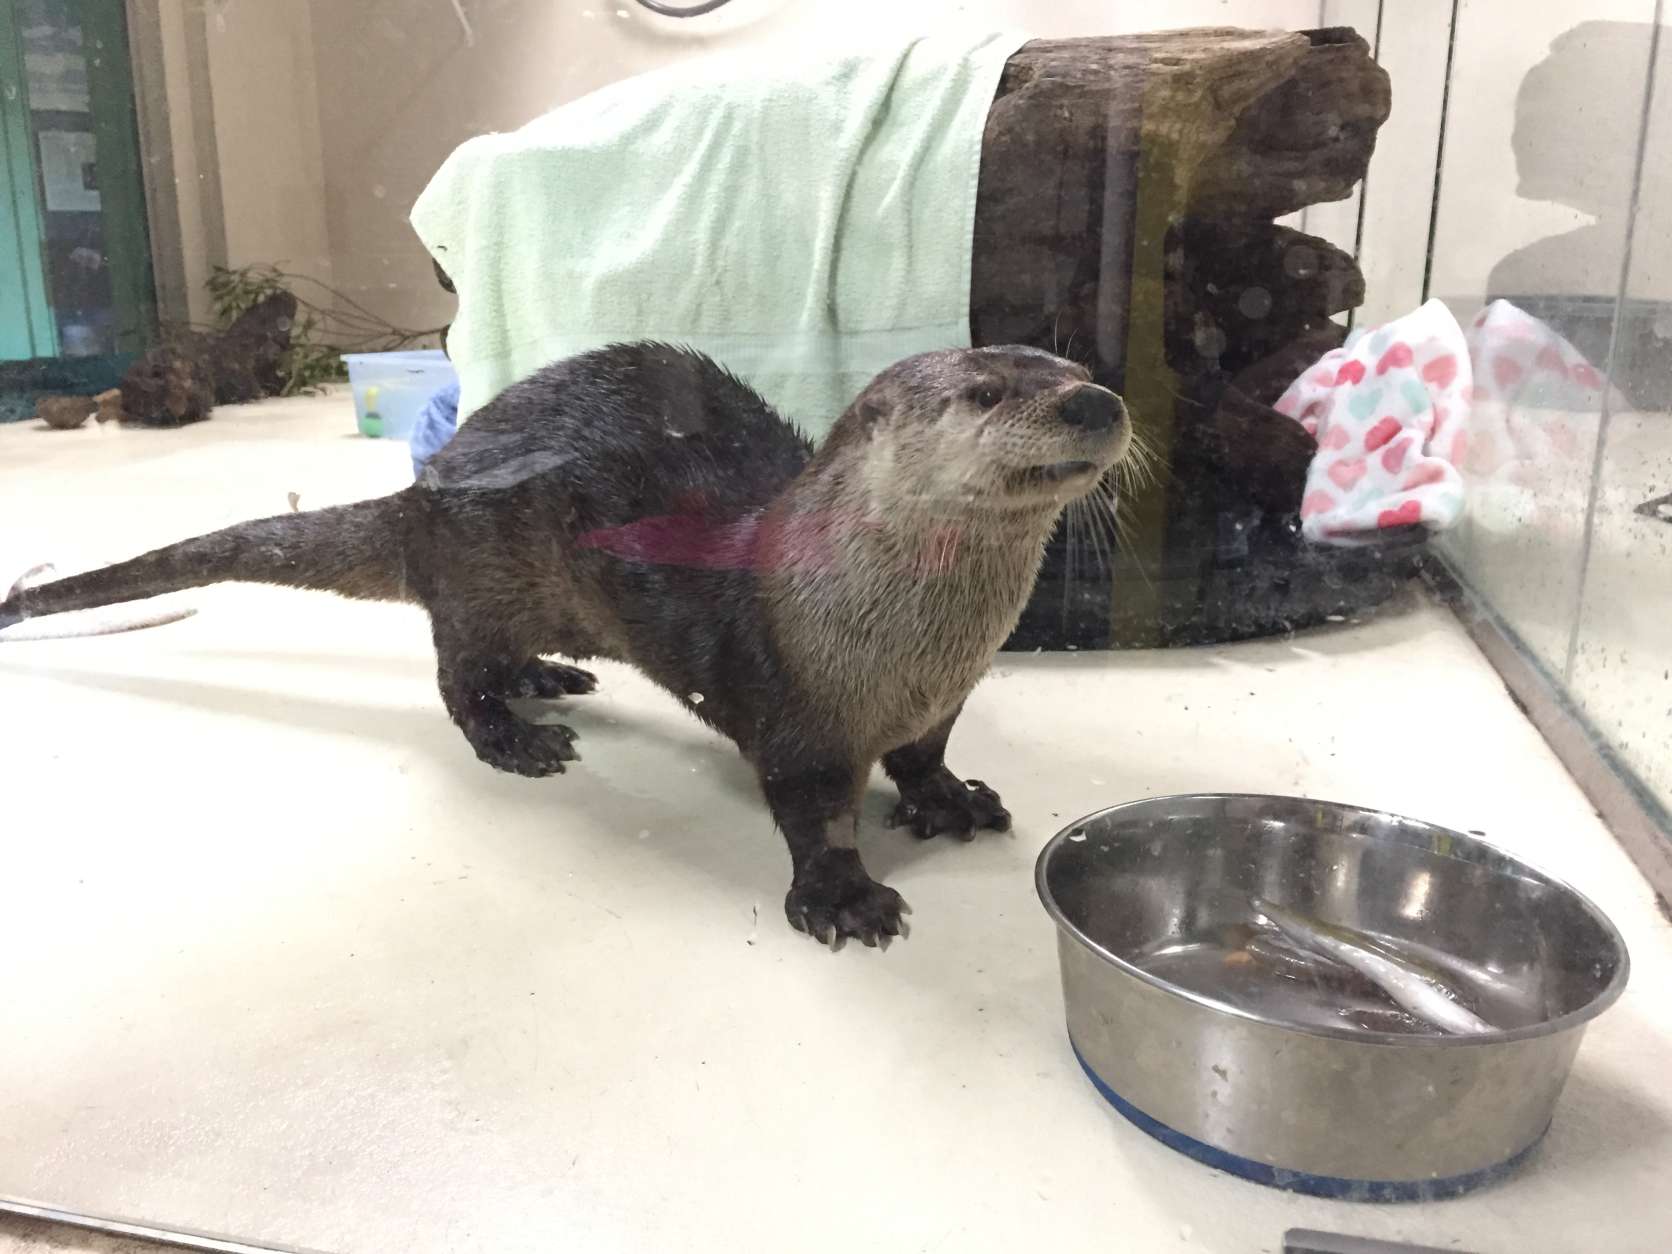 Calvert, the museum's new river otter, gets ready to eat some fish. He arrived at the museum on Valentine's Day. (WTOP/Michelle Basch)